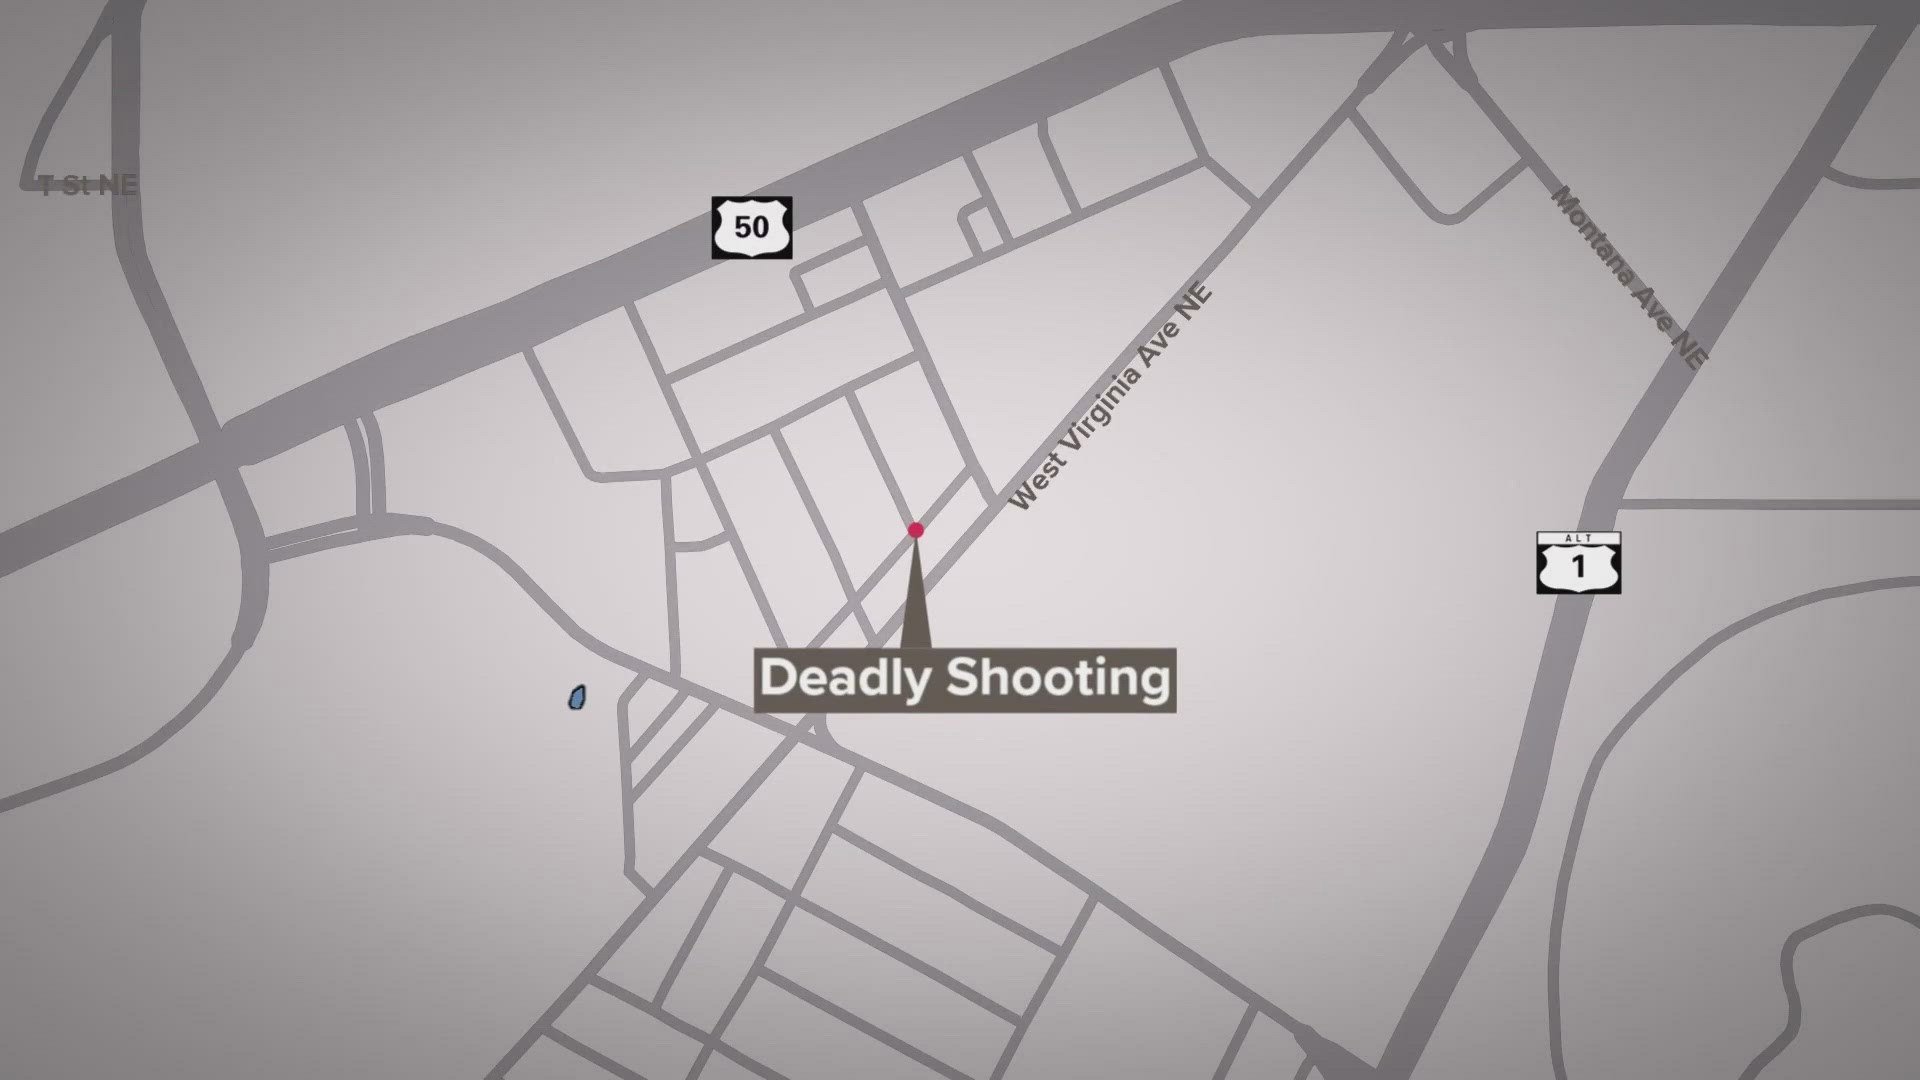 Officers were called to the 1800 block of Providence Street at 1:30 p.m. Saturday afternoon for a report of a shooting.